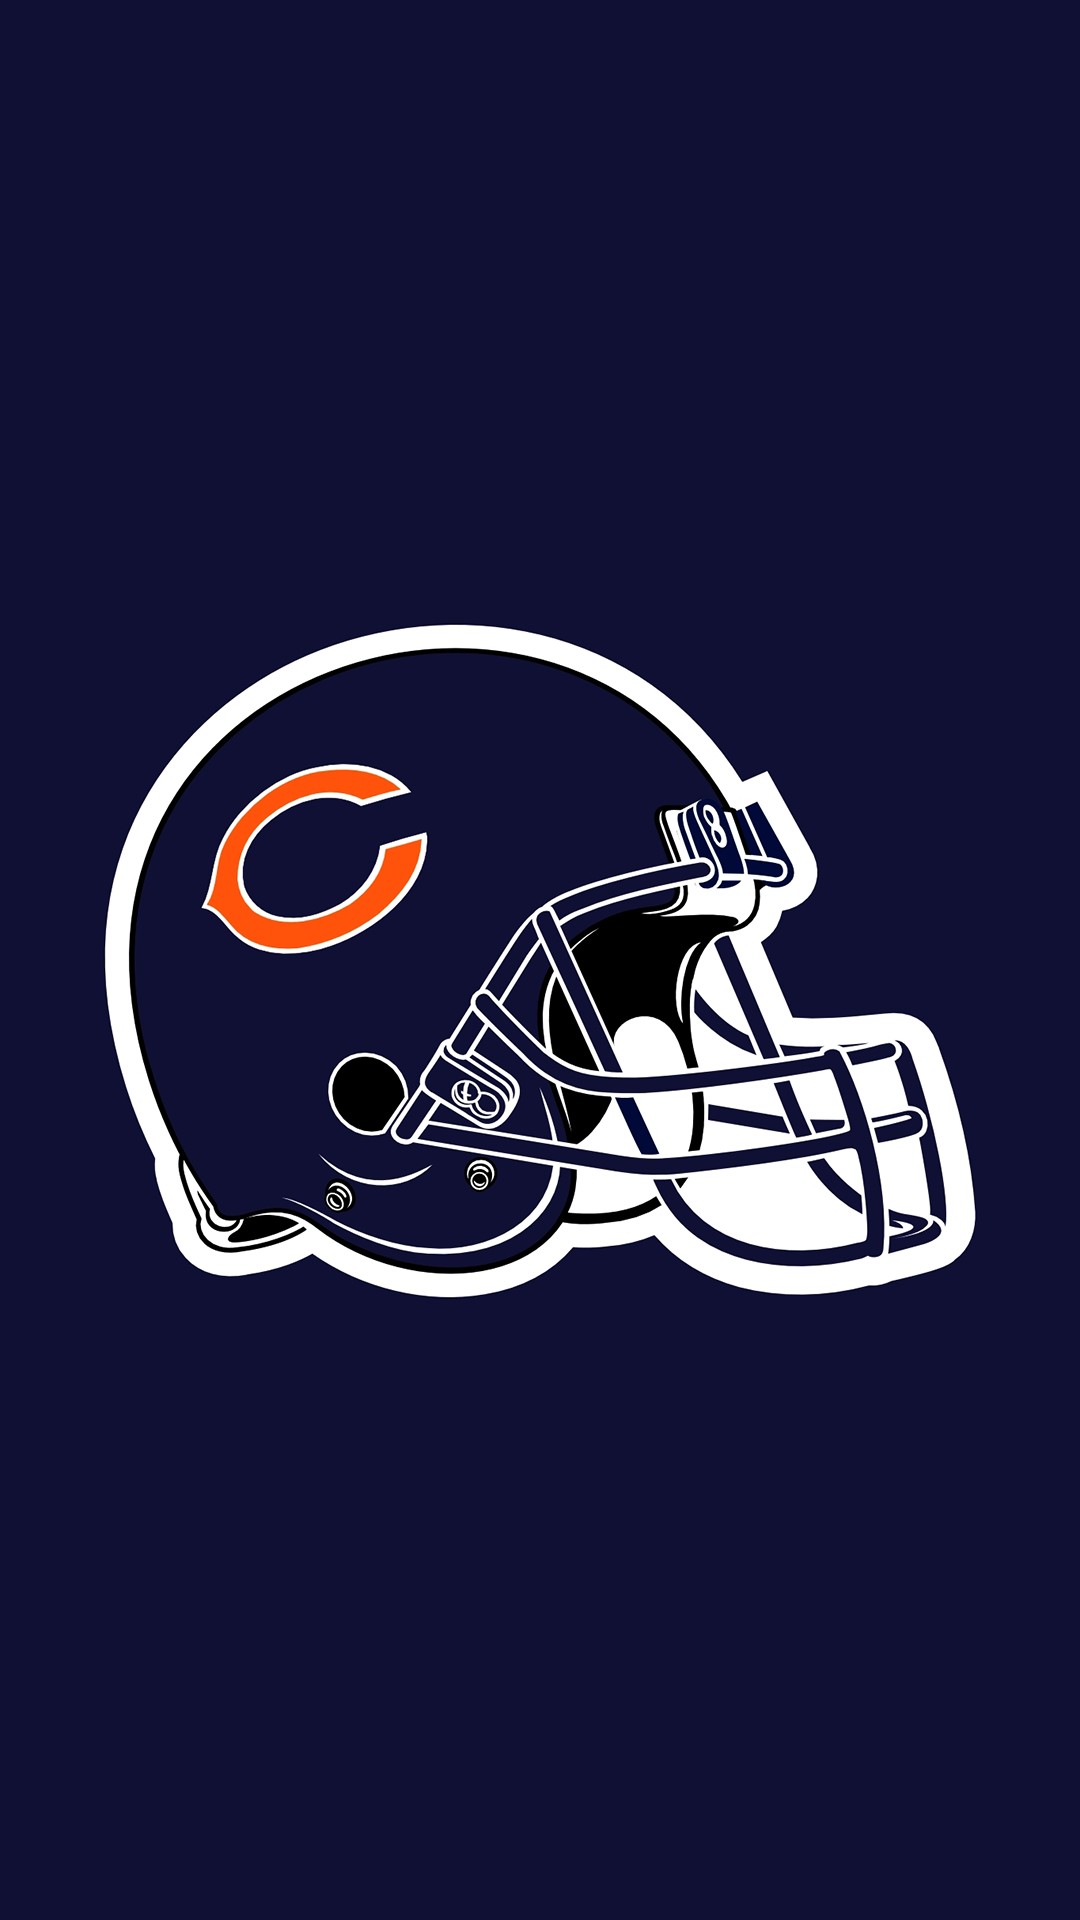 Chicago Bears iPhone Wallpaper High Quality With high-resolution 1080X1920 pixel. Donwload and set as wallpaper for your iPhone X, iPhone XS home screen backgrounds, XS Max, XR, iPhone8 lock screen wallpaper, iPhone 7, 6, SE, and other mobile devices